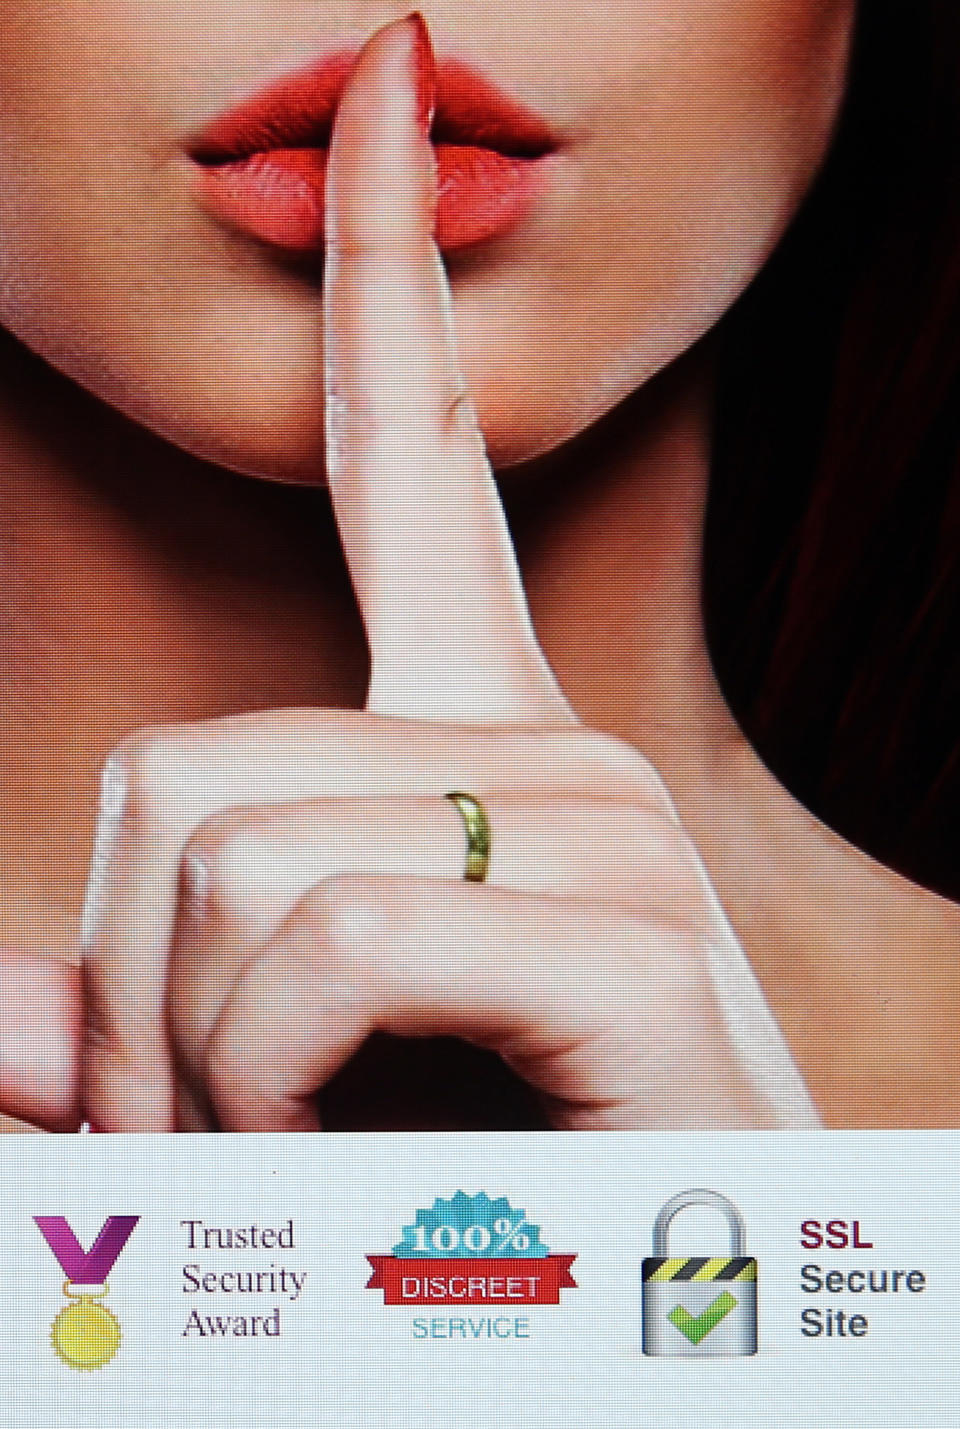 What Happened With the Ashley Madison Hack in 2015?